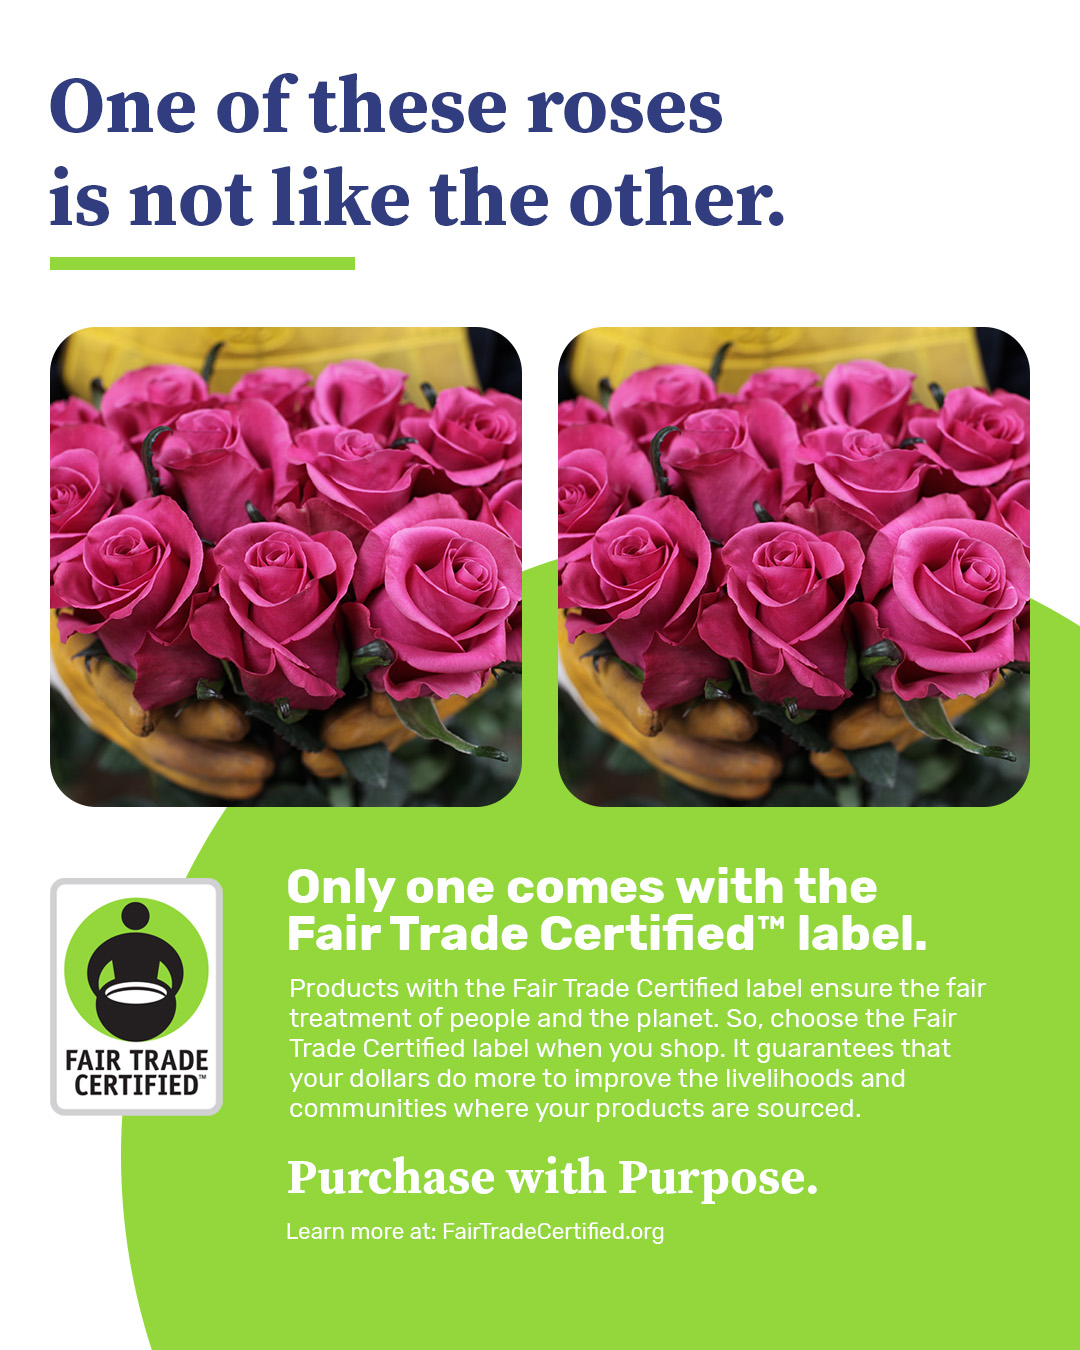 Visual of two identical images of roses with the text, "One of these roses is not like the other. Only one comes with the Fair Trade Certified label."